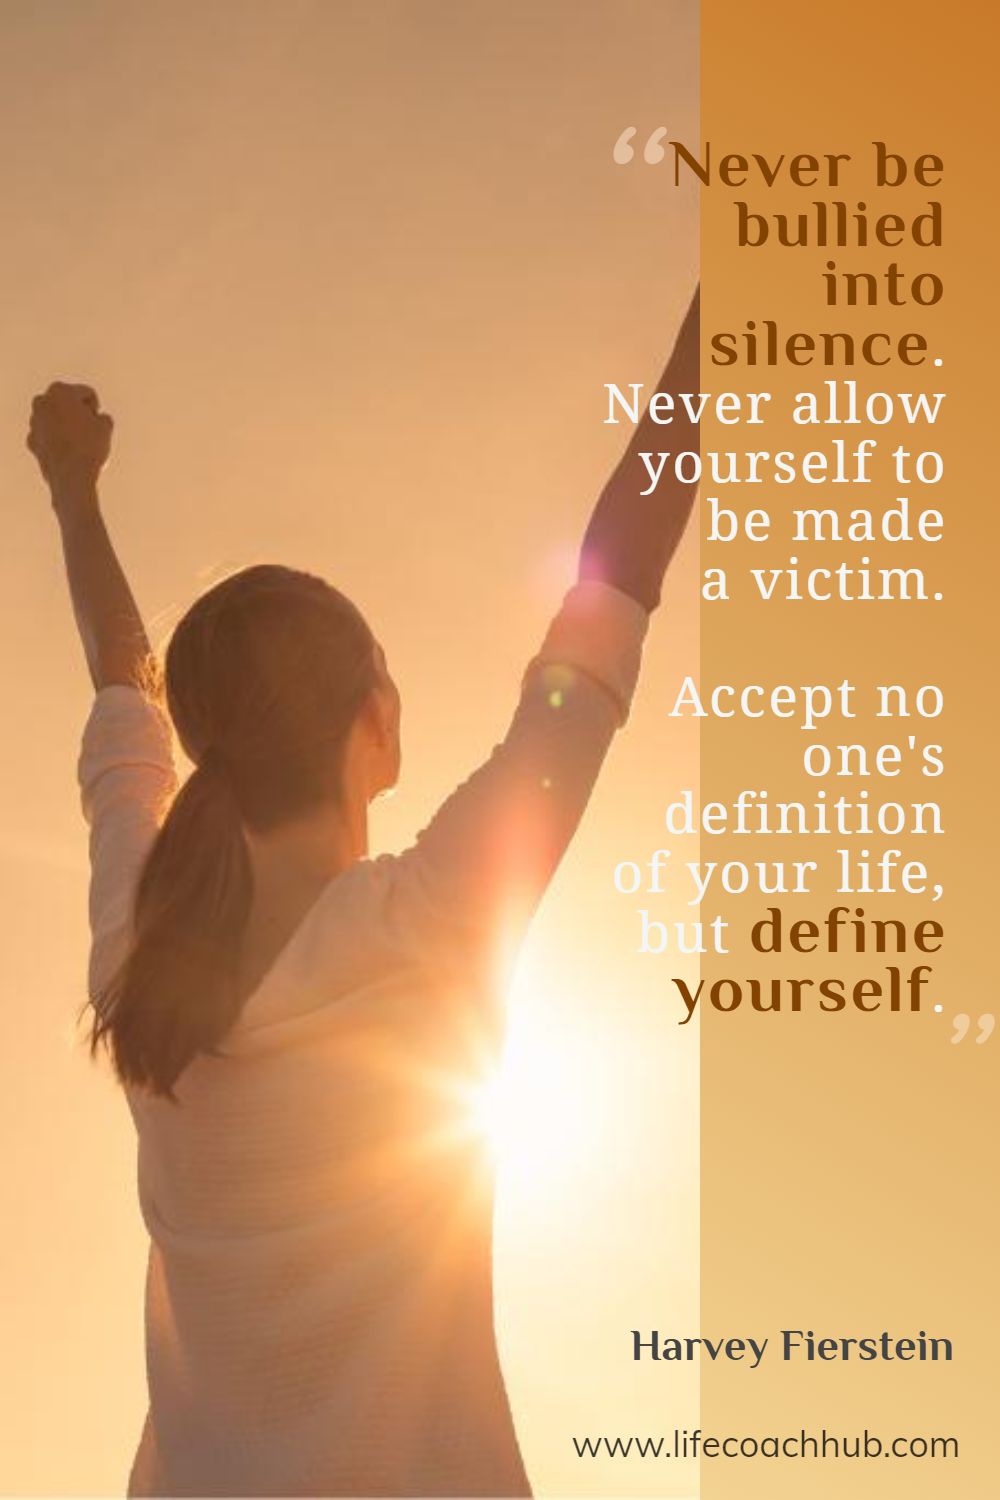 Never be bullied into silence. Never allow yourself to be made a victim. Accept no one's definition of your life, but define yourself. Harvey Fierstein Coaching Quote